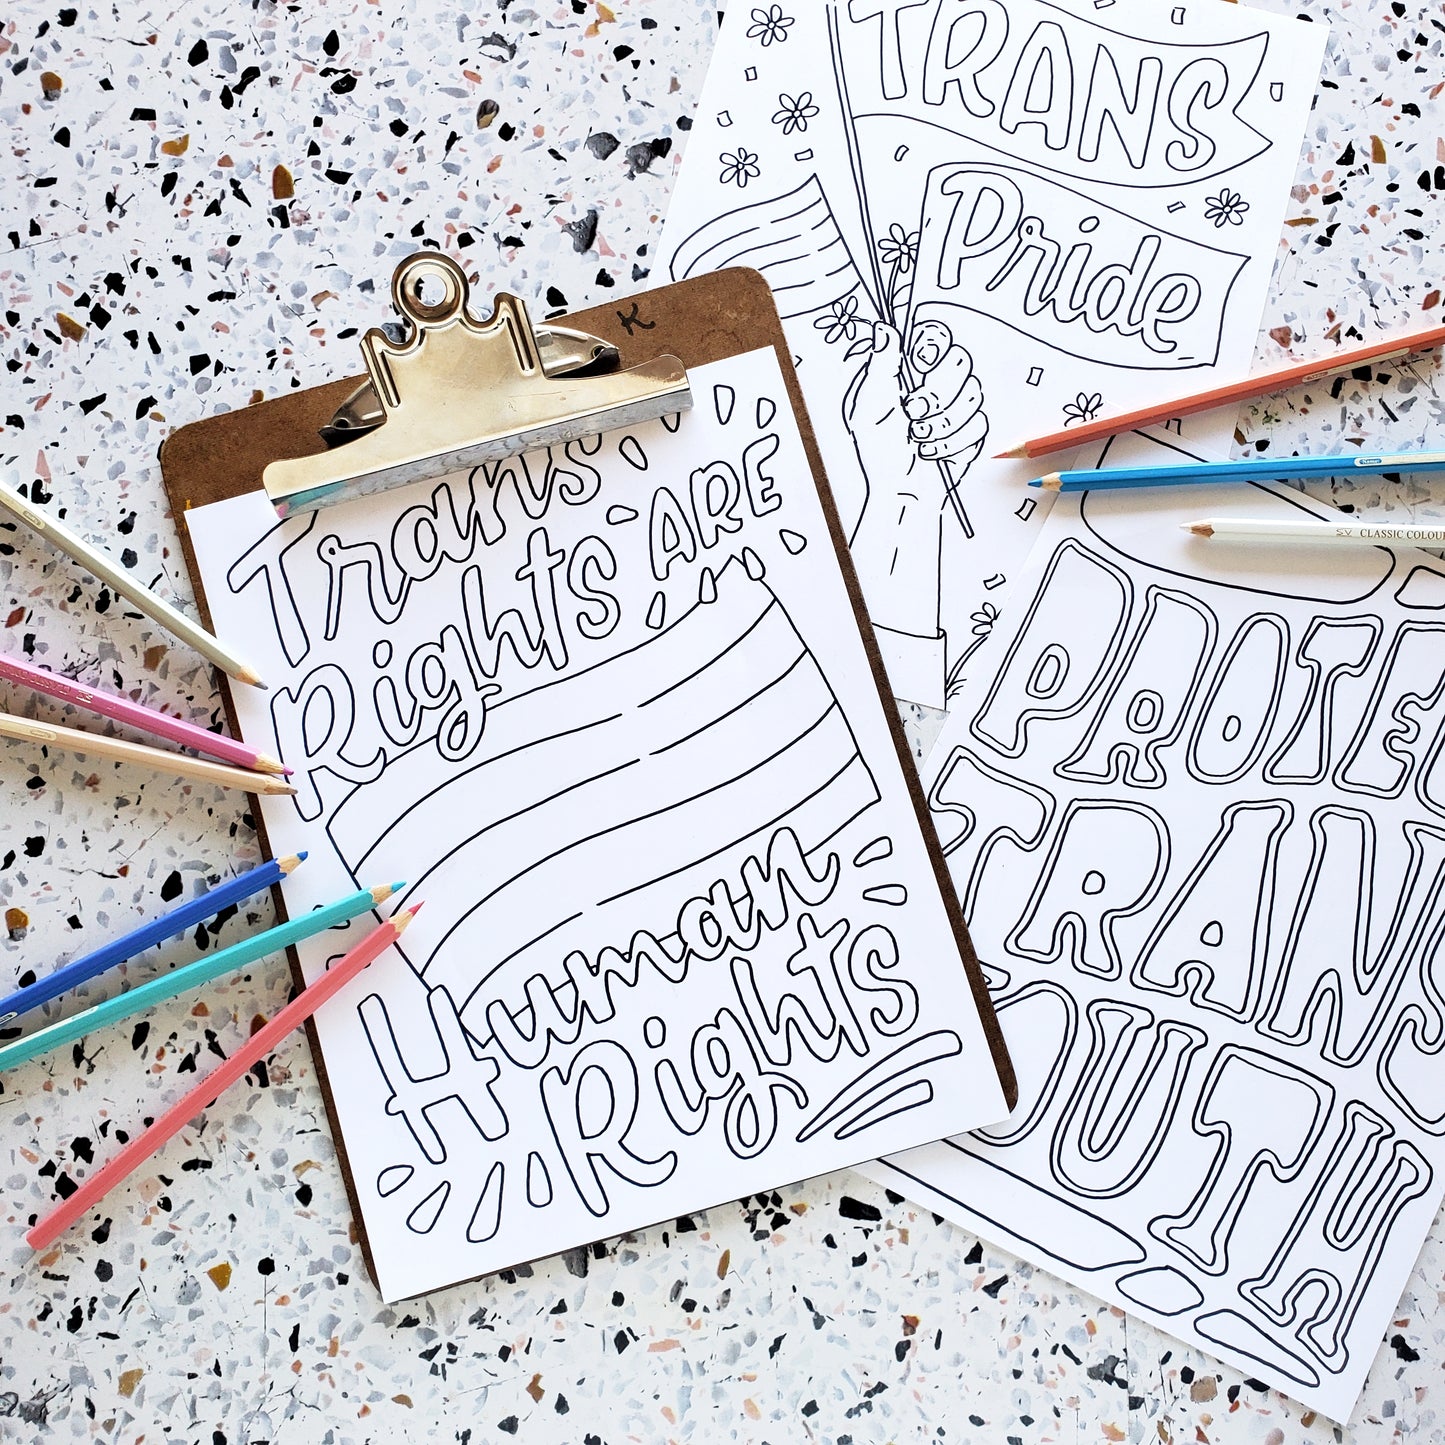 Trans Rights Protest Poster Coloring Pages - Trans Rights Fundraiser